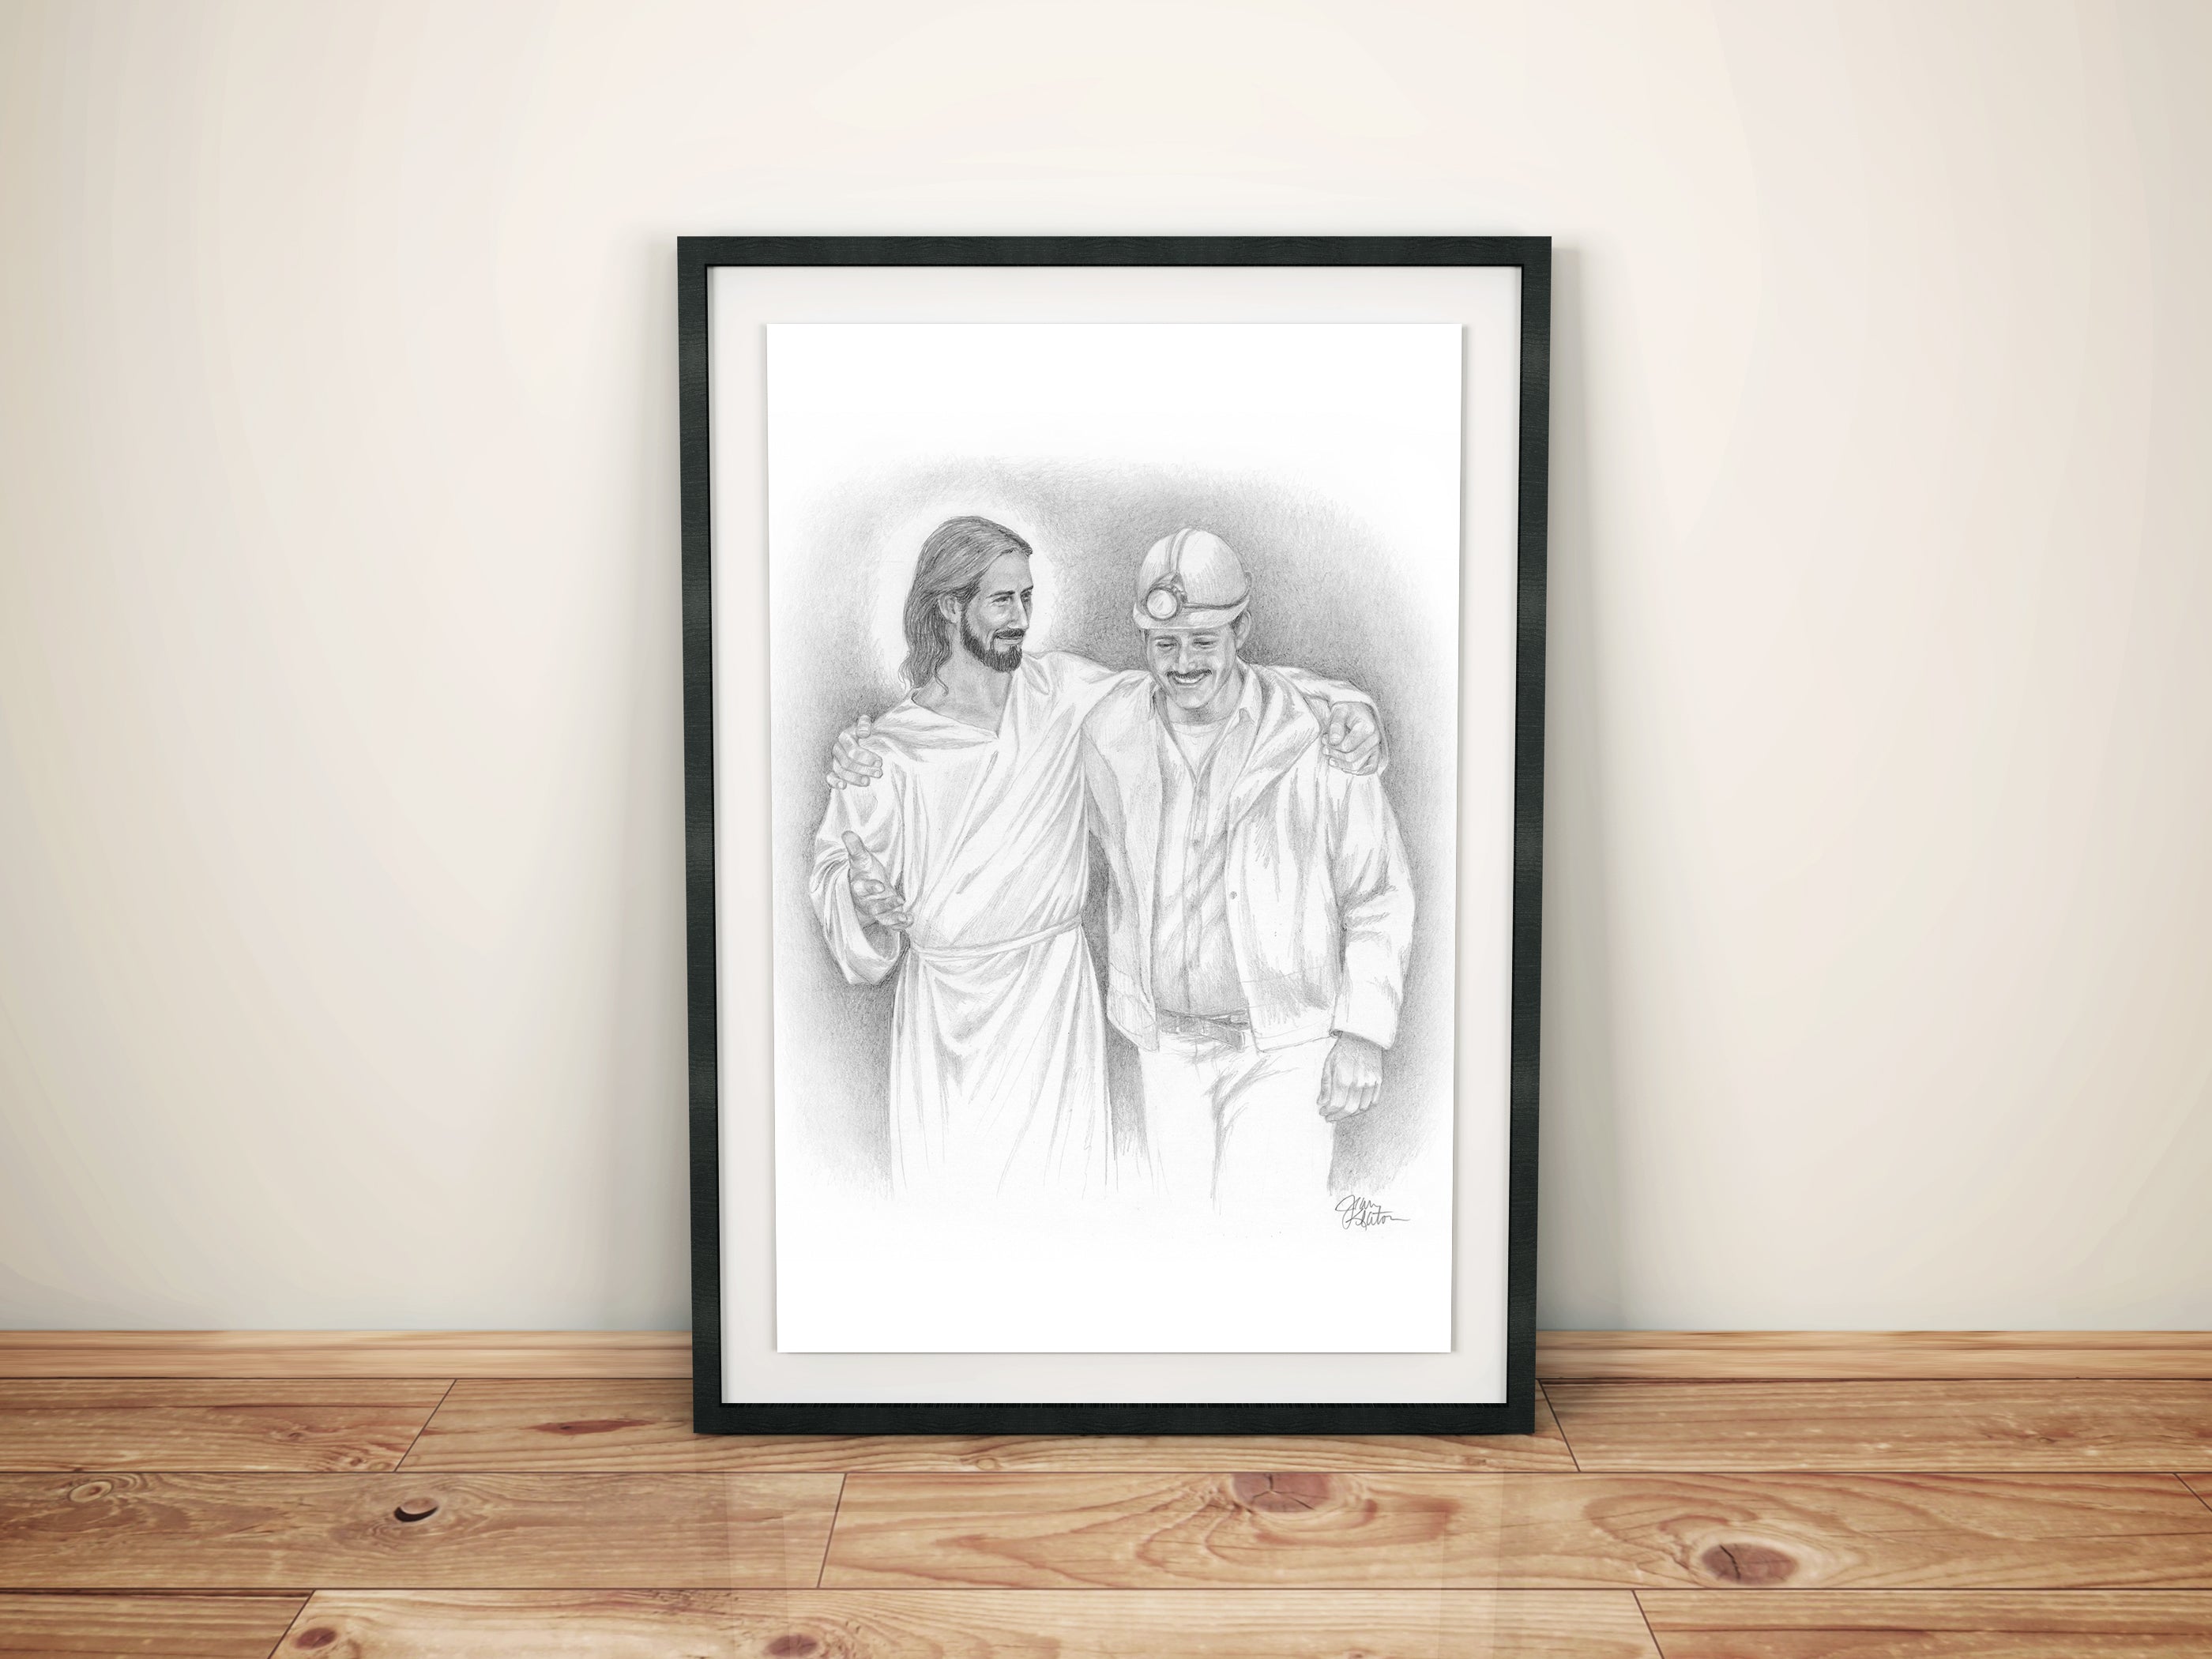 lds jesus clipart black and white apple